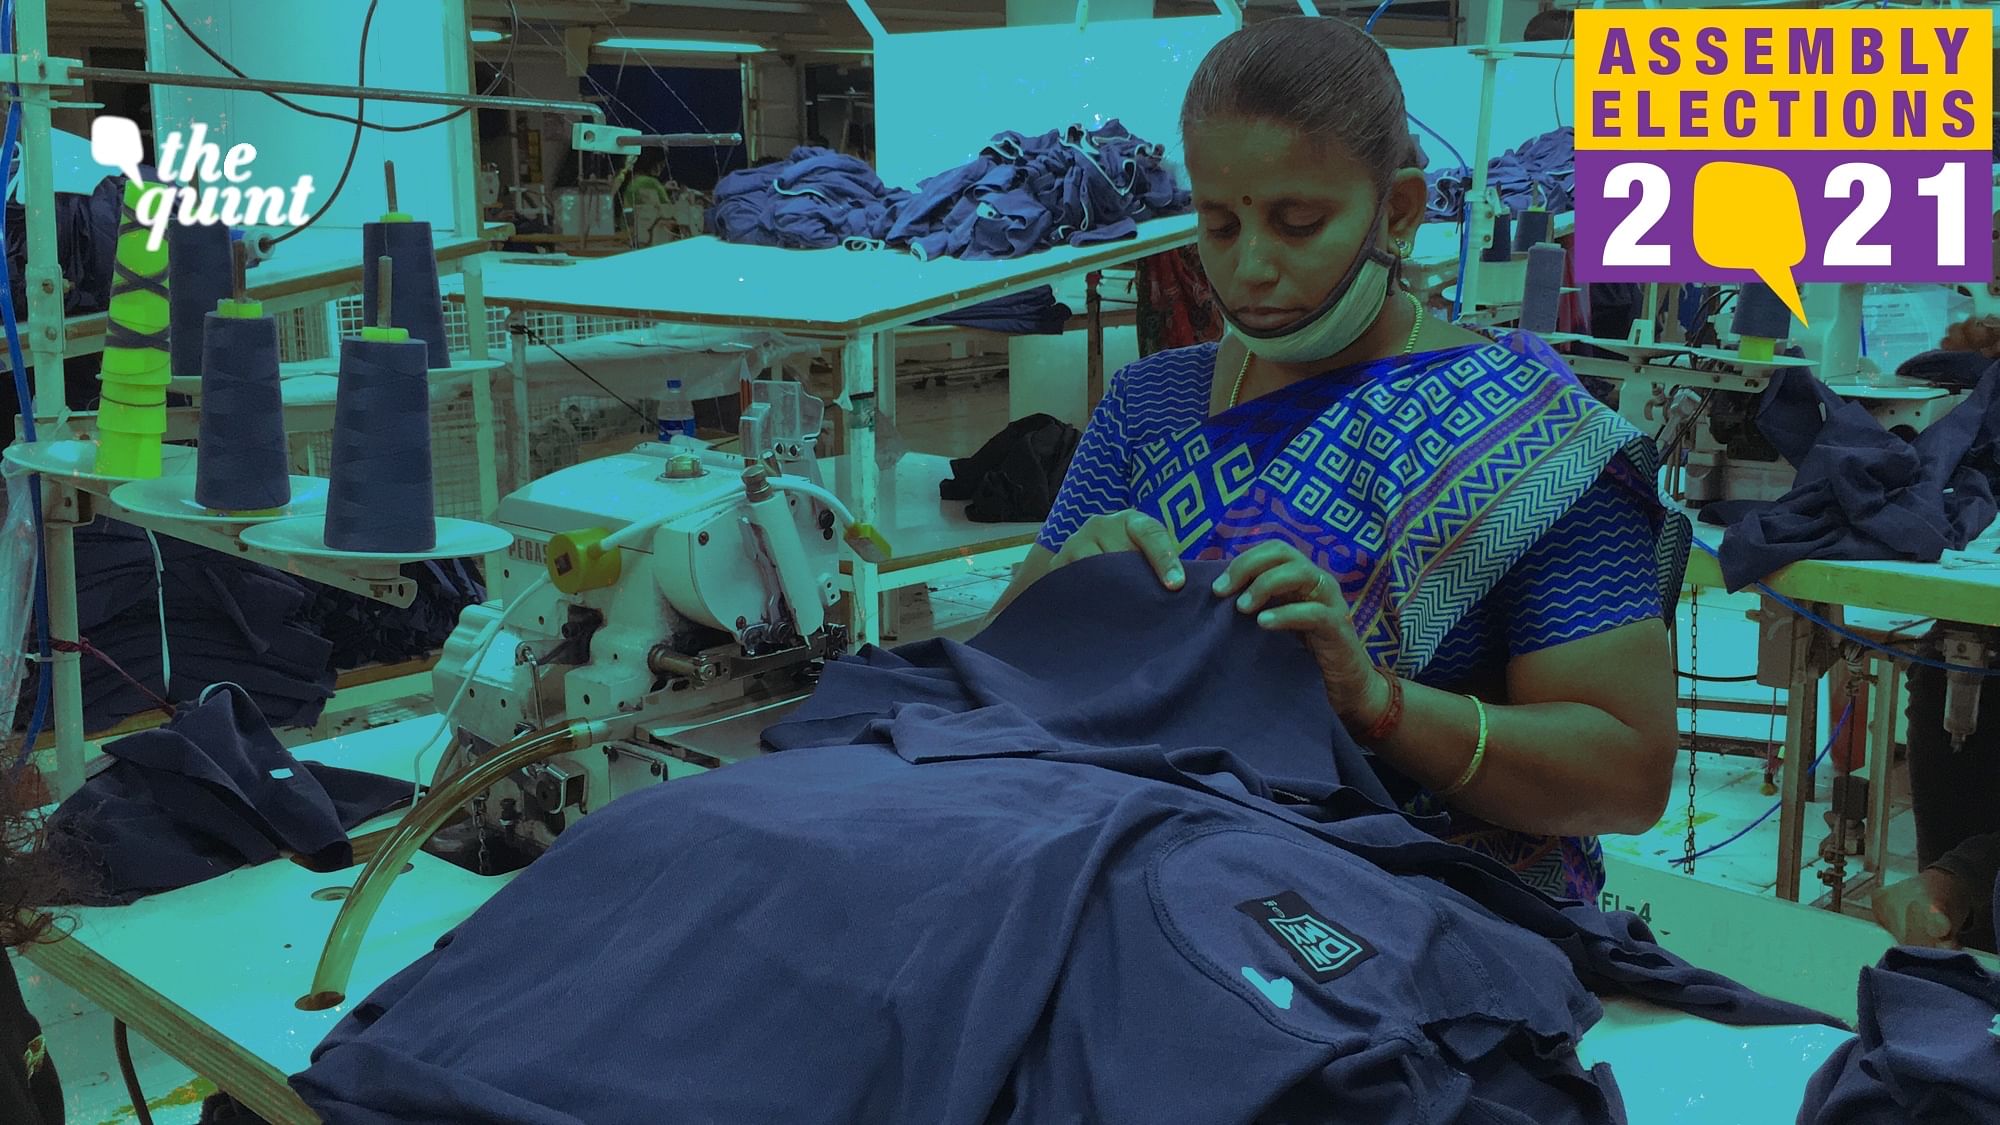 Workers at textile looms want a revision of wages as they are unable to afford the increasing cost of living.